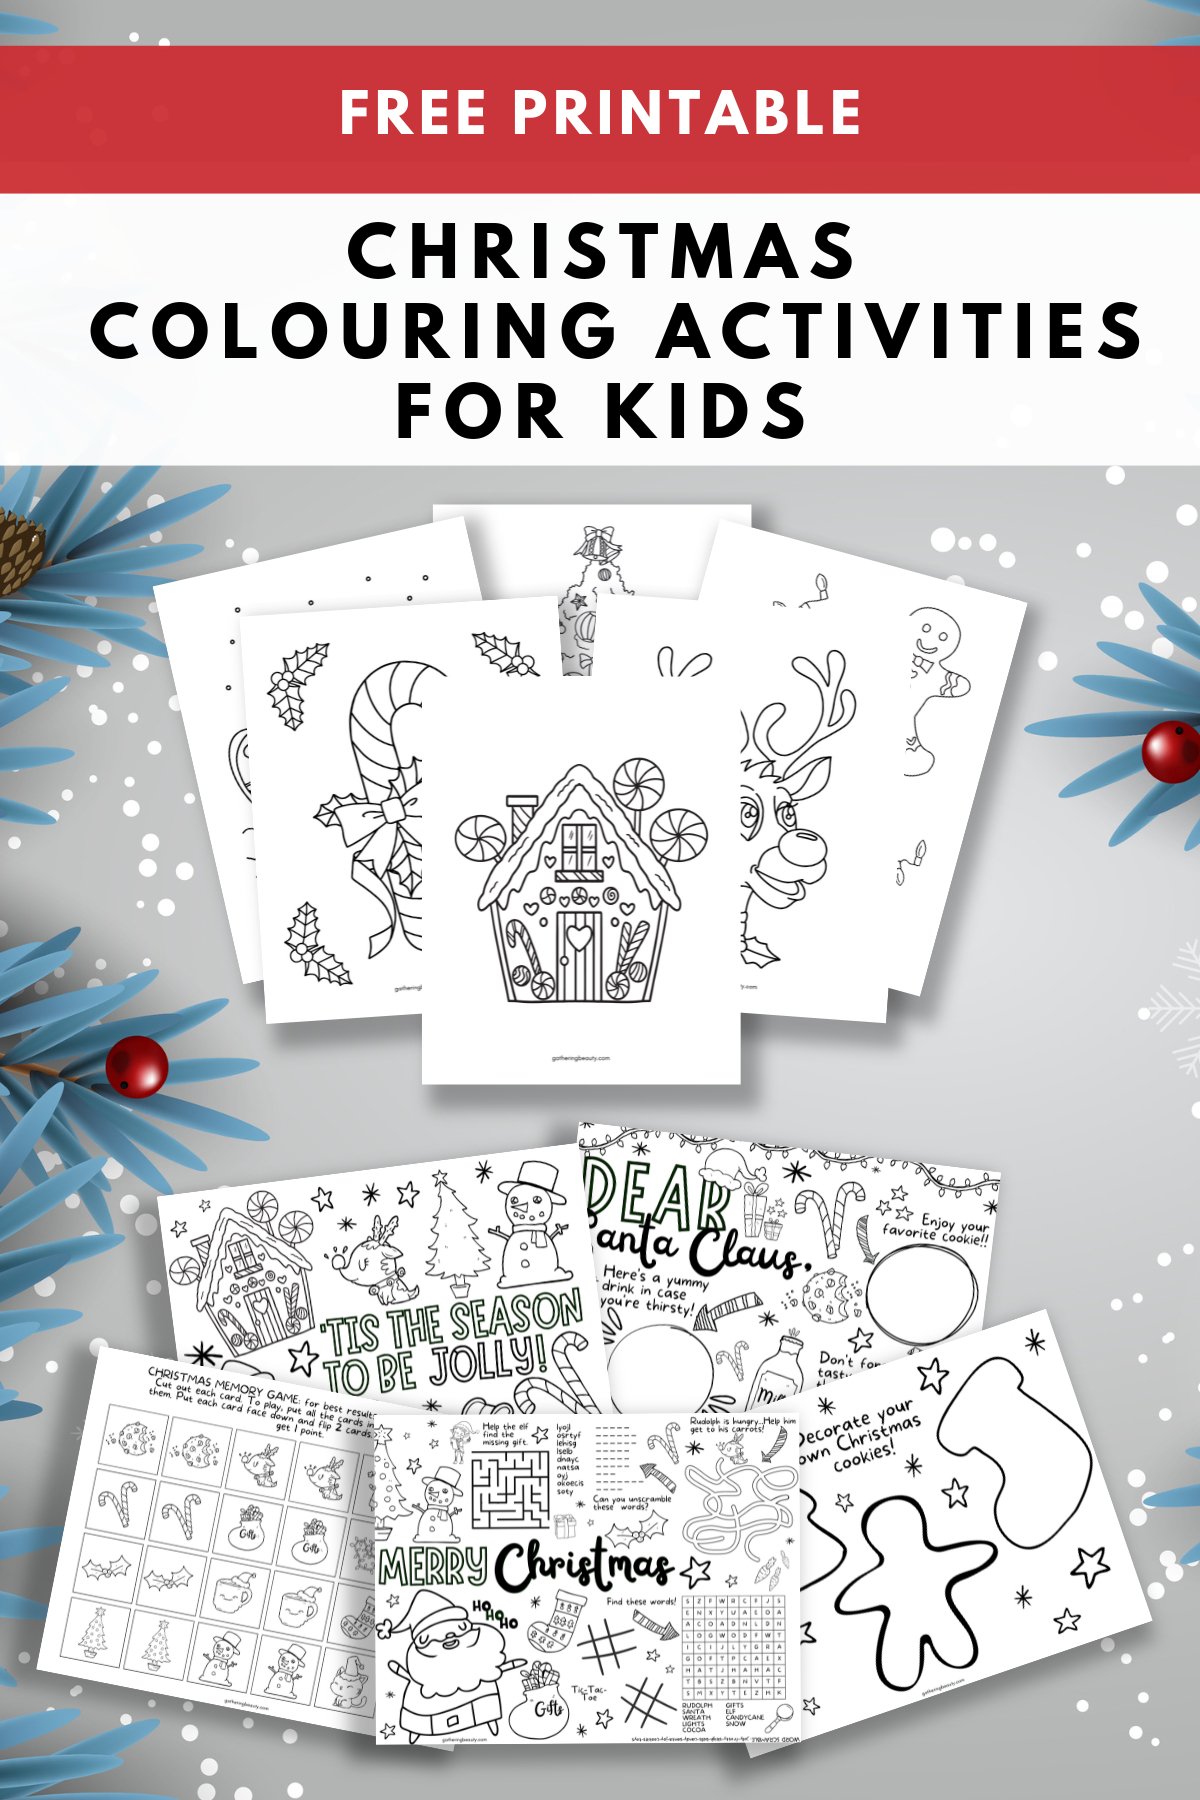 Christmas Activities for Kids (with free printables)